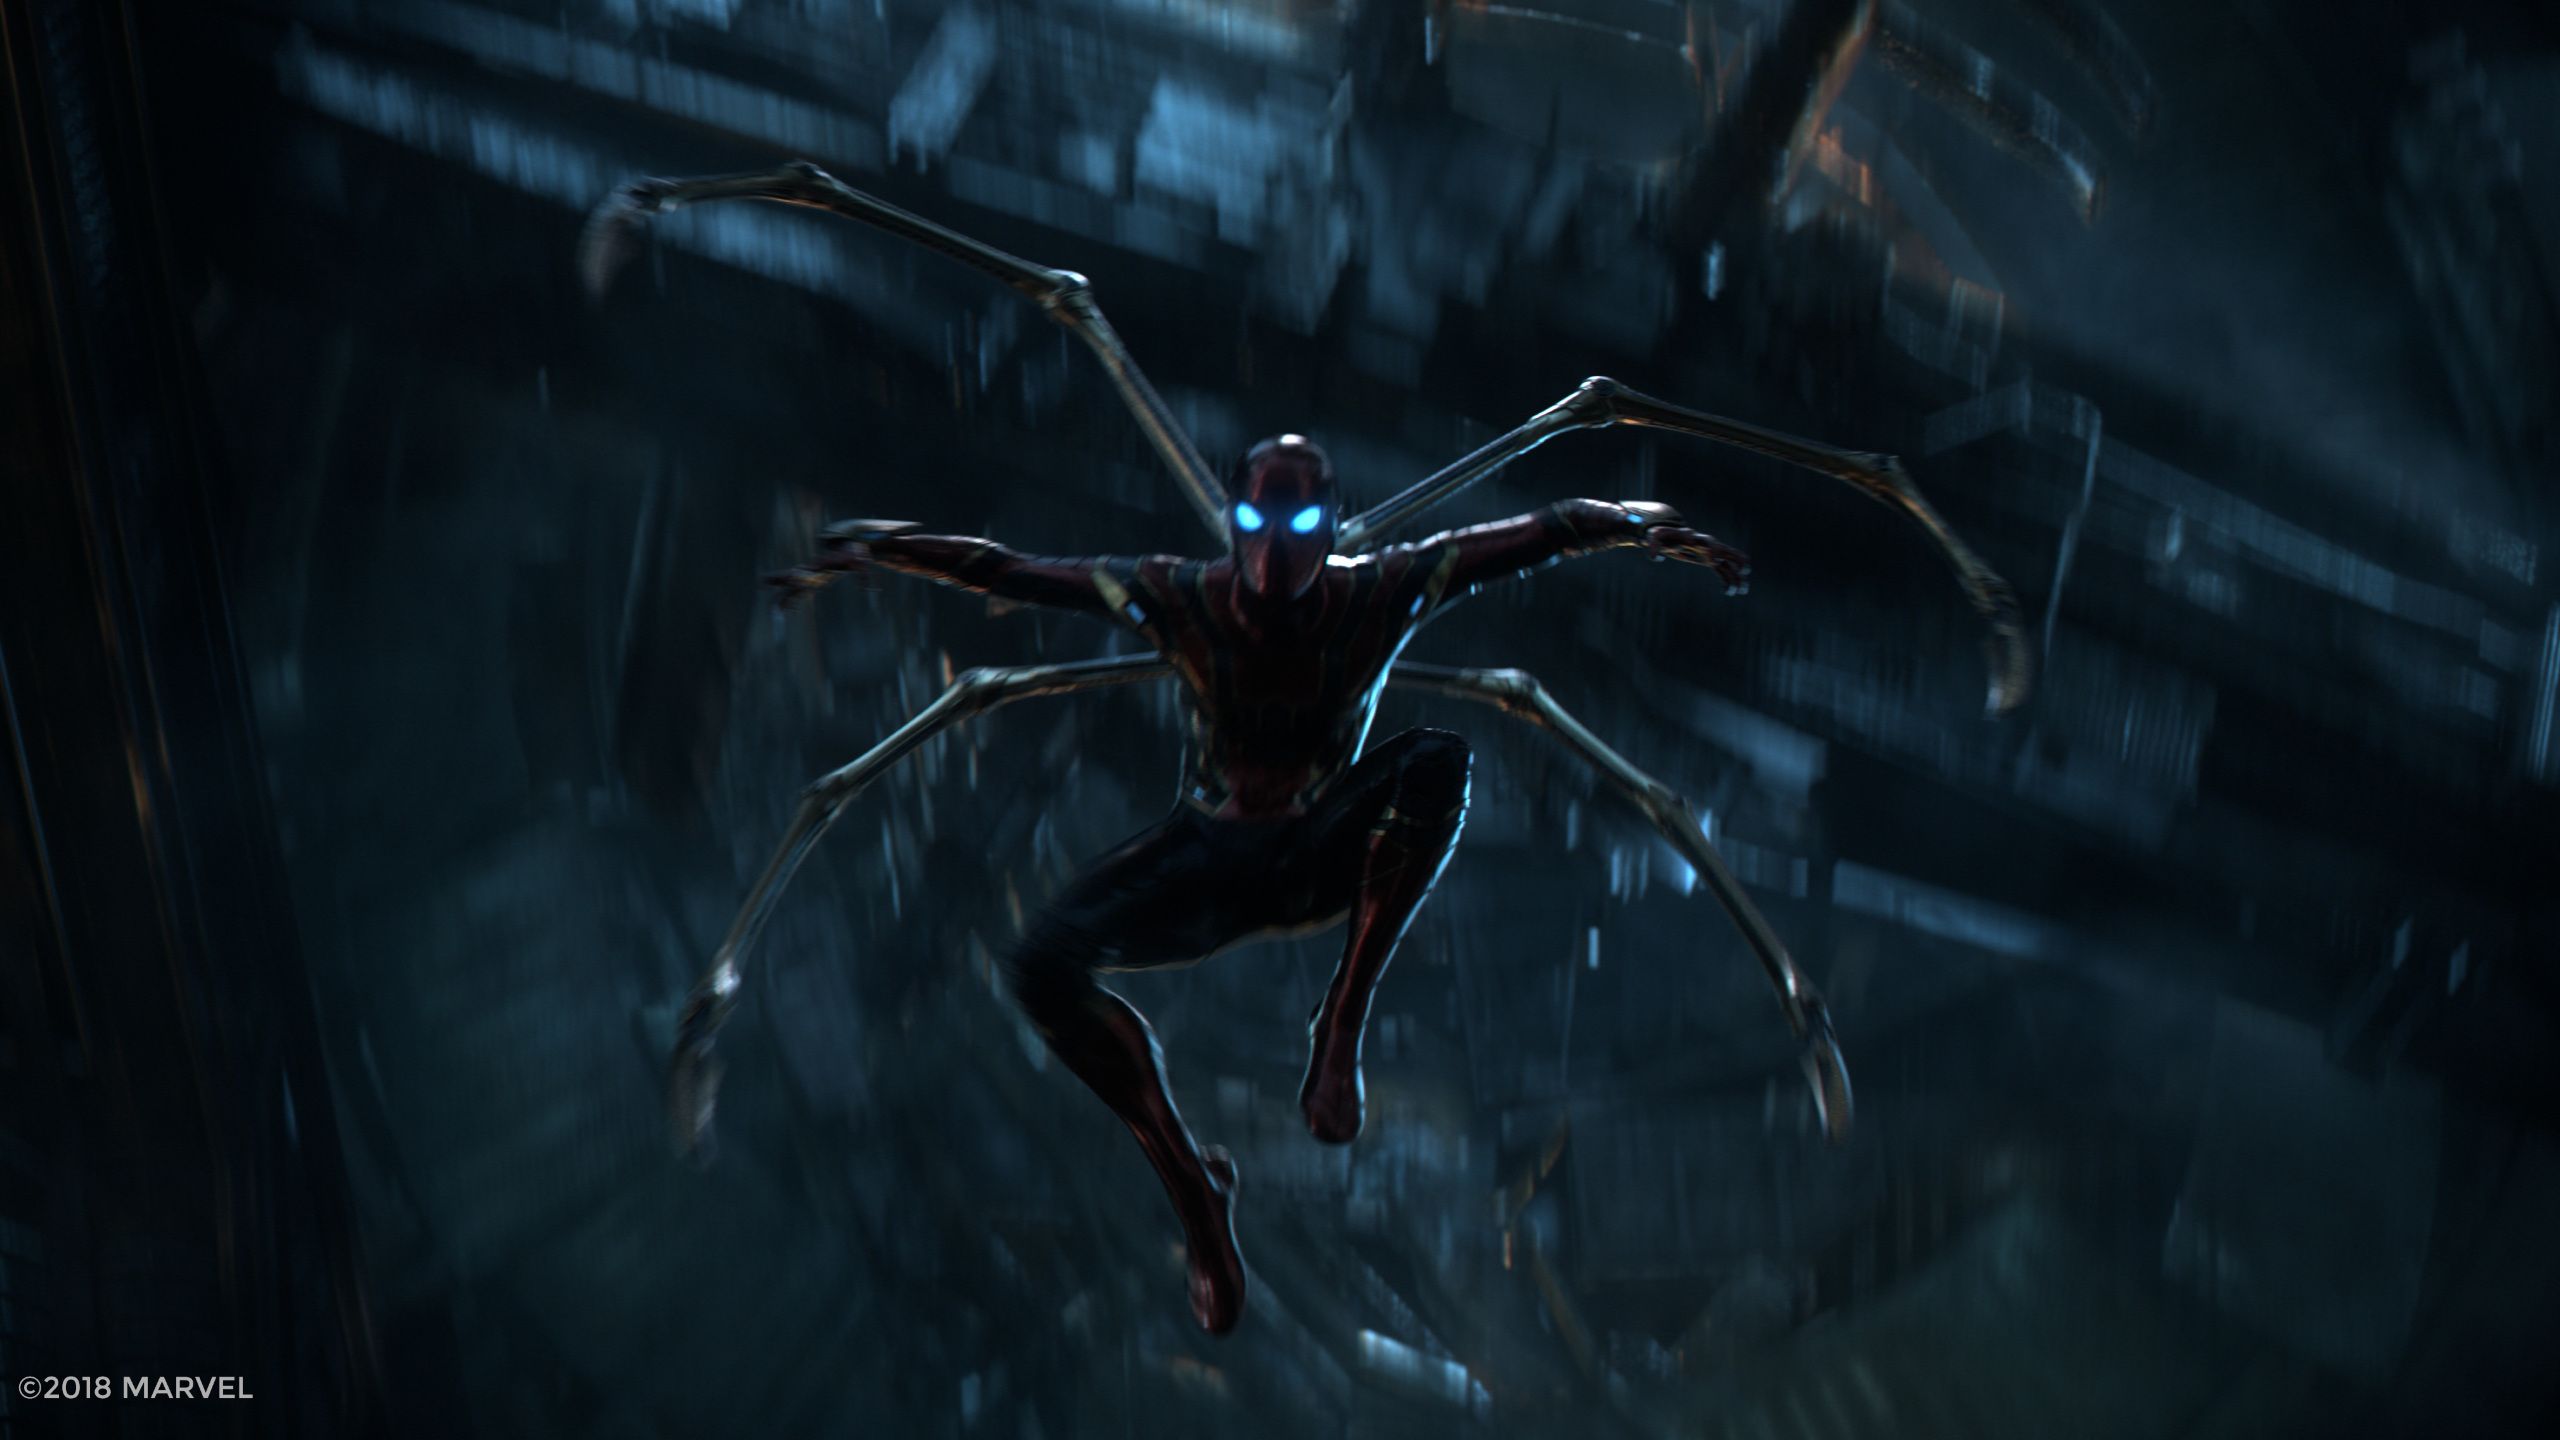 Free download 2560x1440 Tom Holland as Spider Man Iron Spider Suit